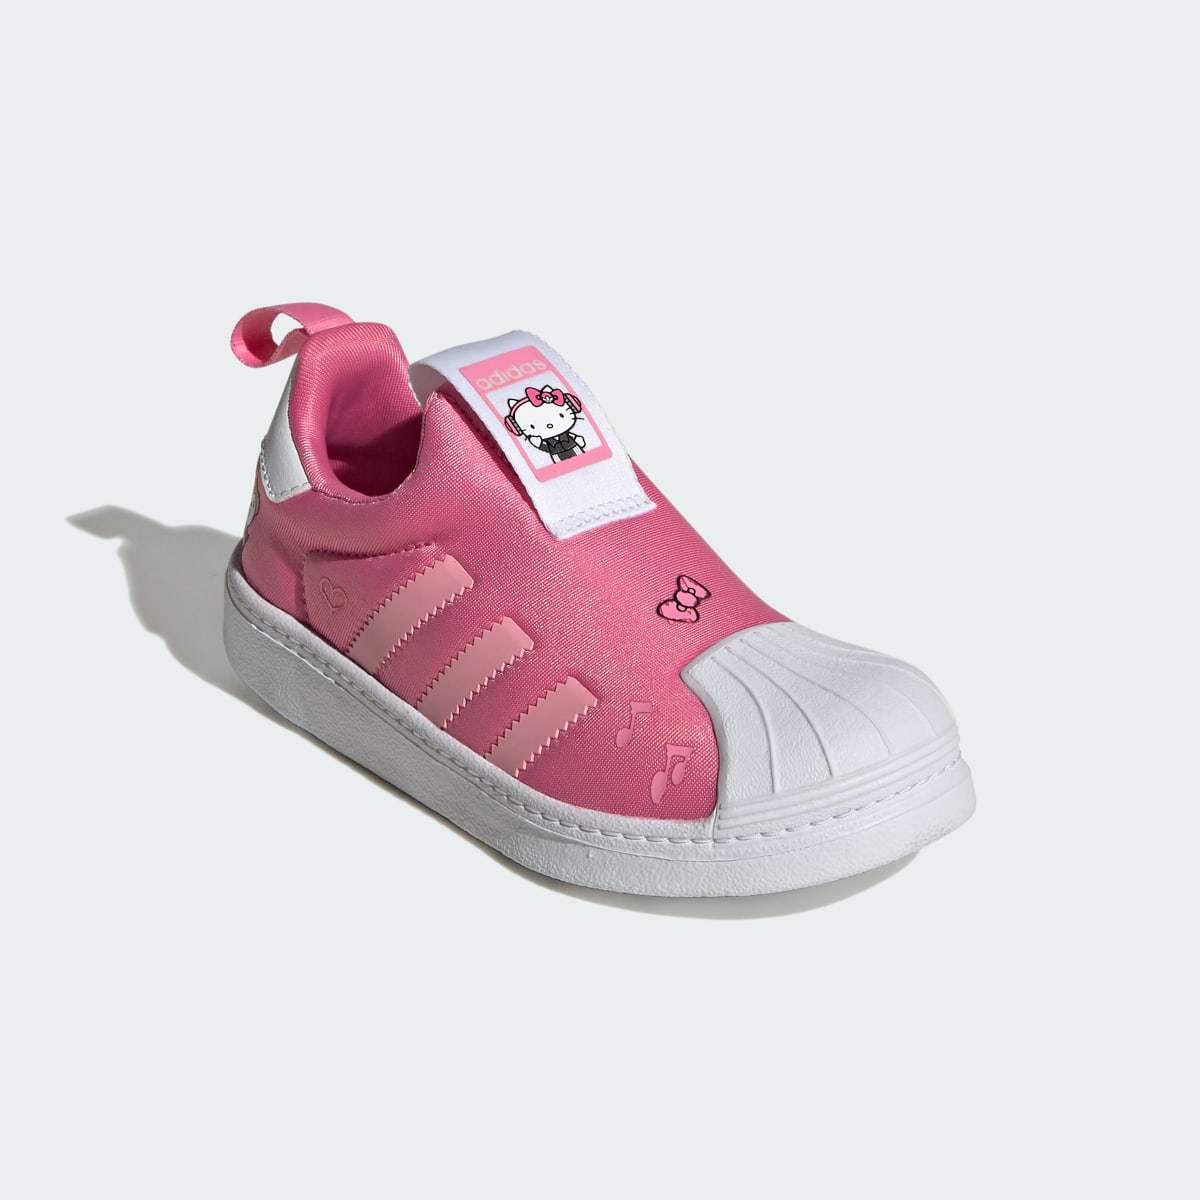 Adidas Originals x Hello Kitty and Friends Superstar 360 Shoes Kids. 5